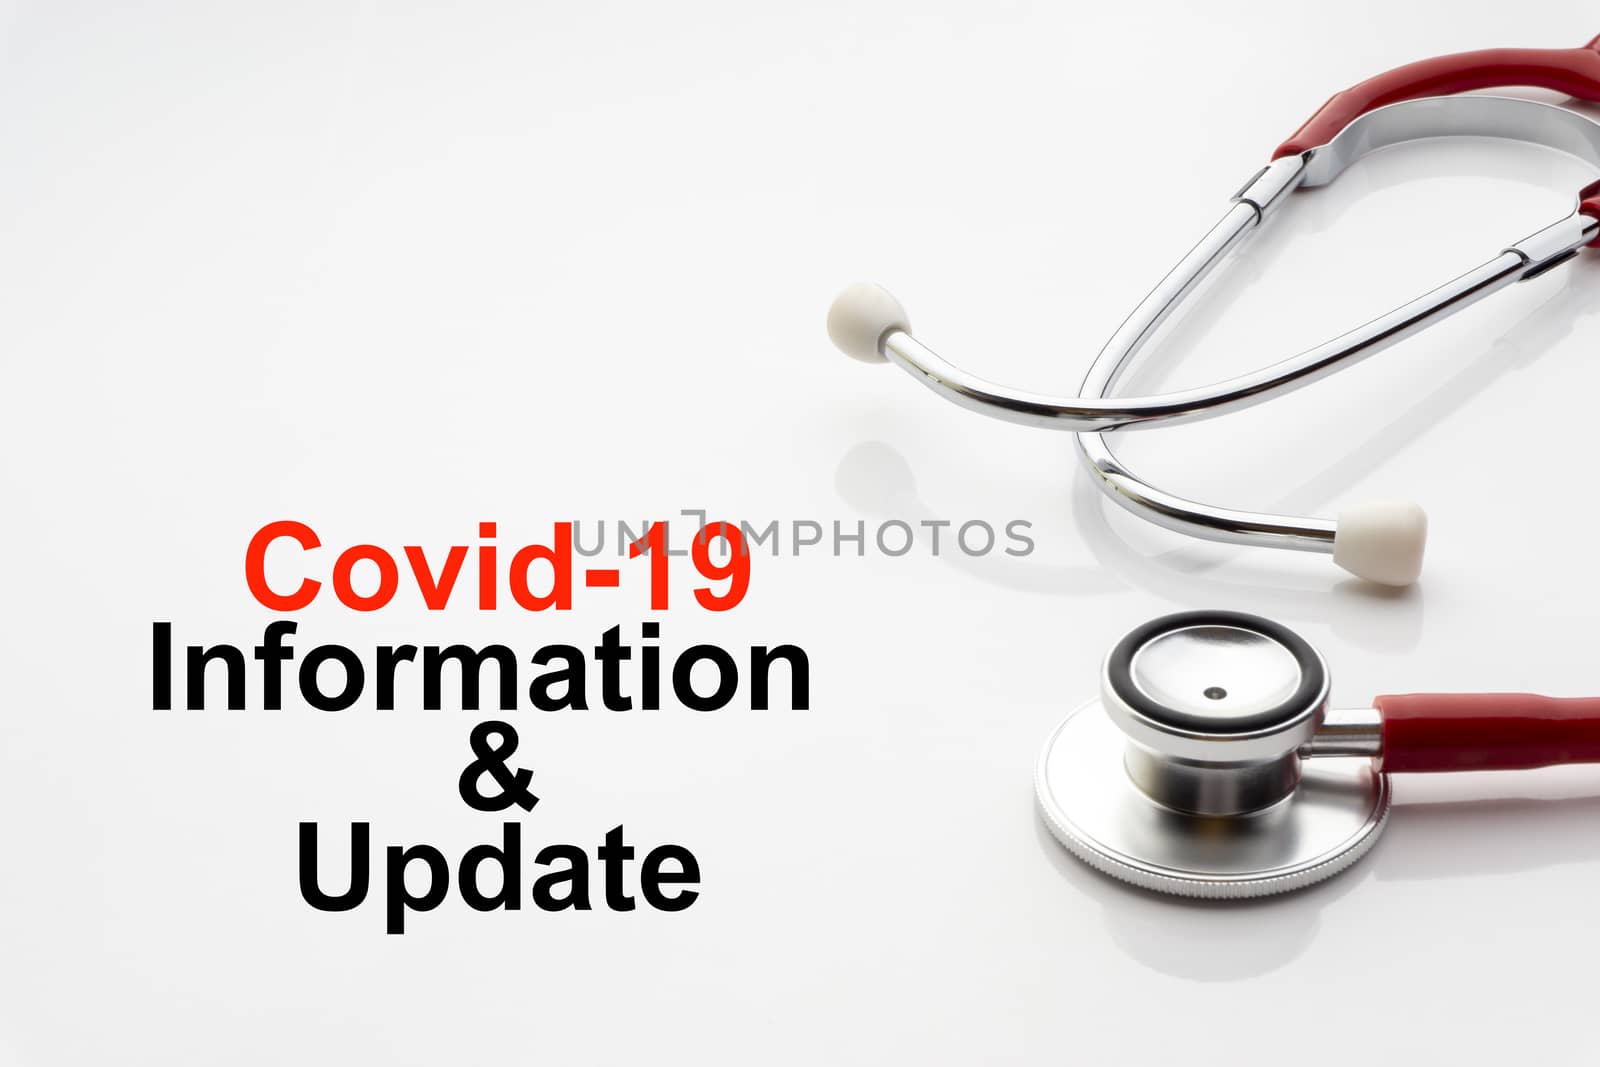 COVID-19 INFORMATION AND UPDATE text with stethoscope on white background by silverwings